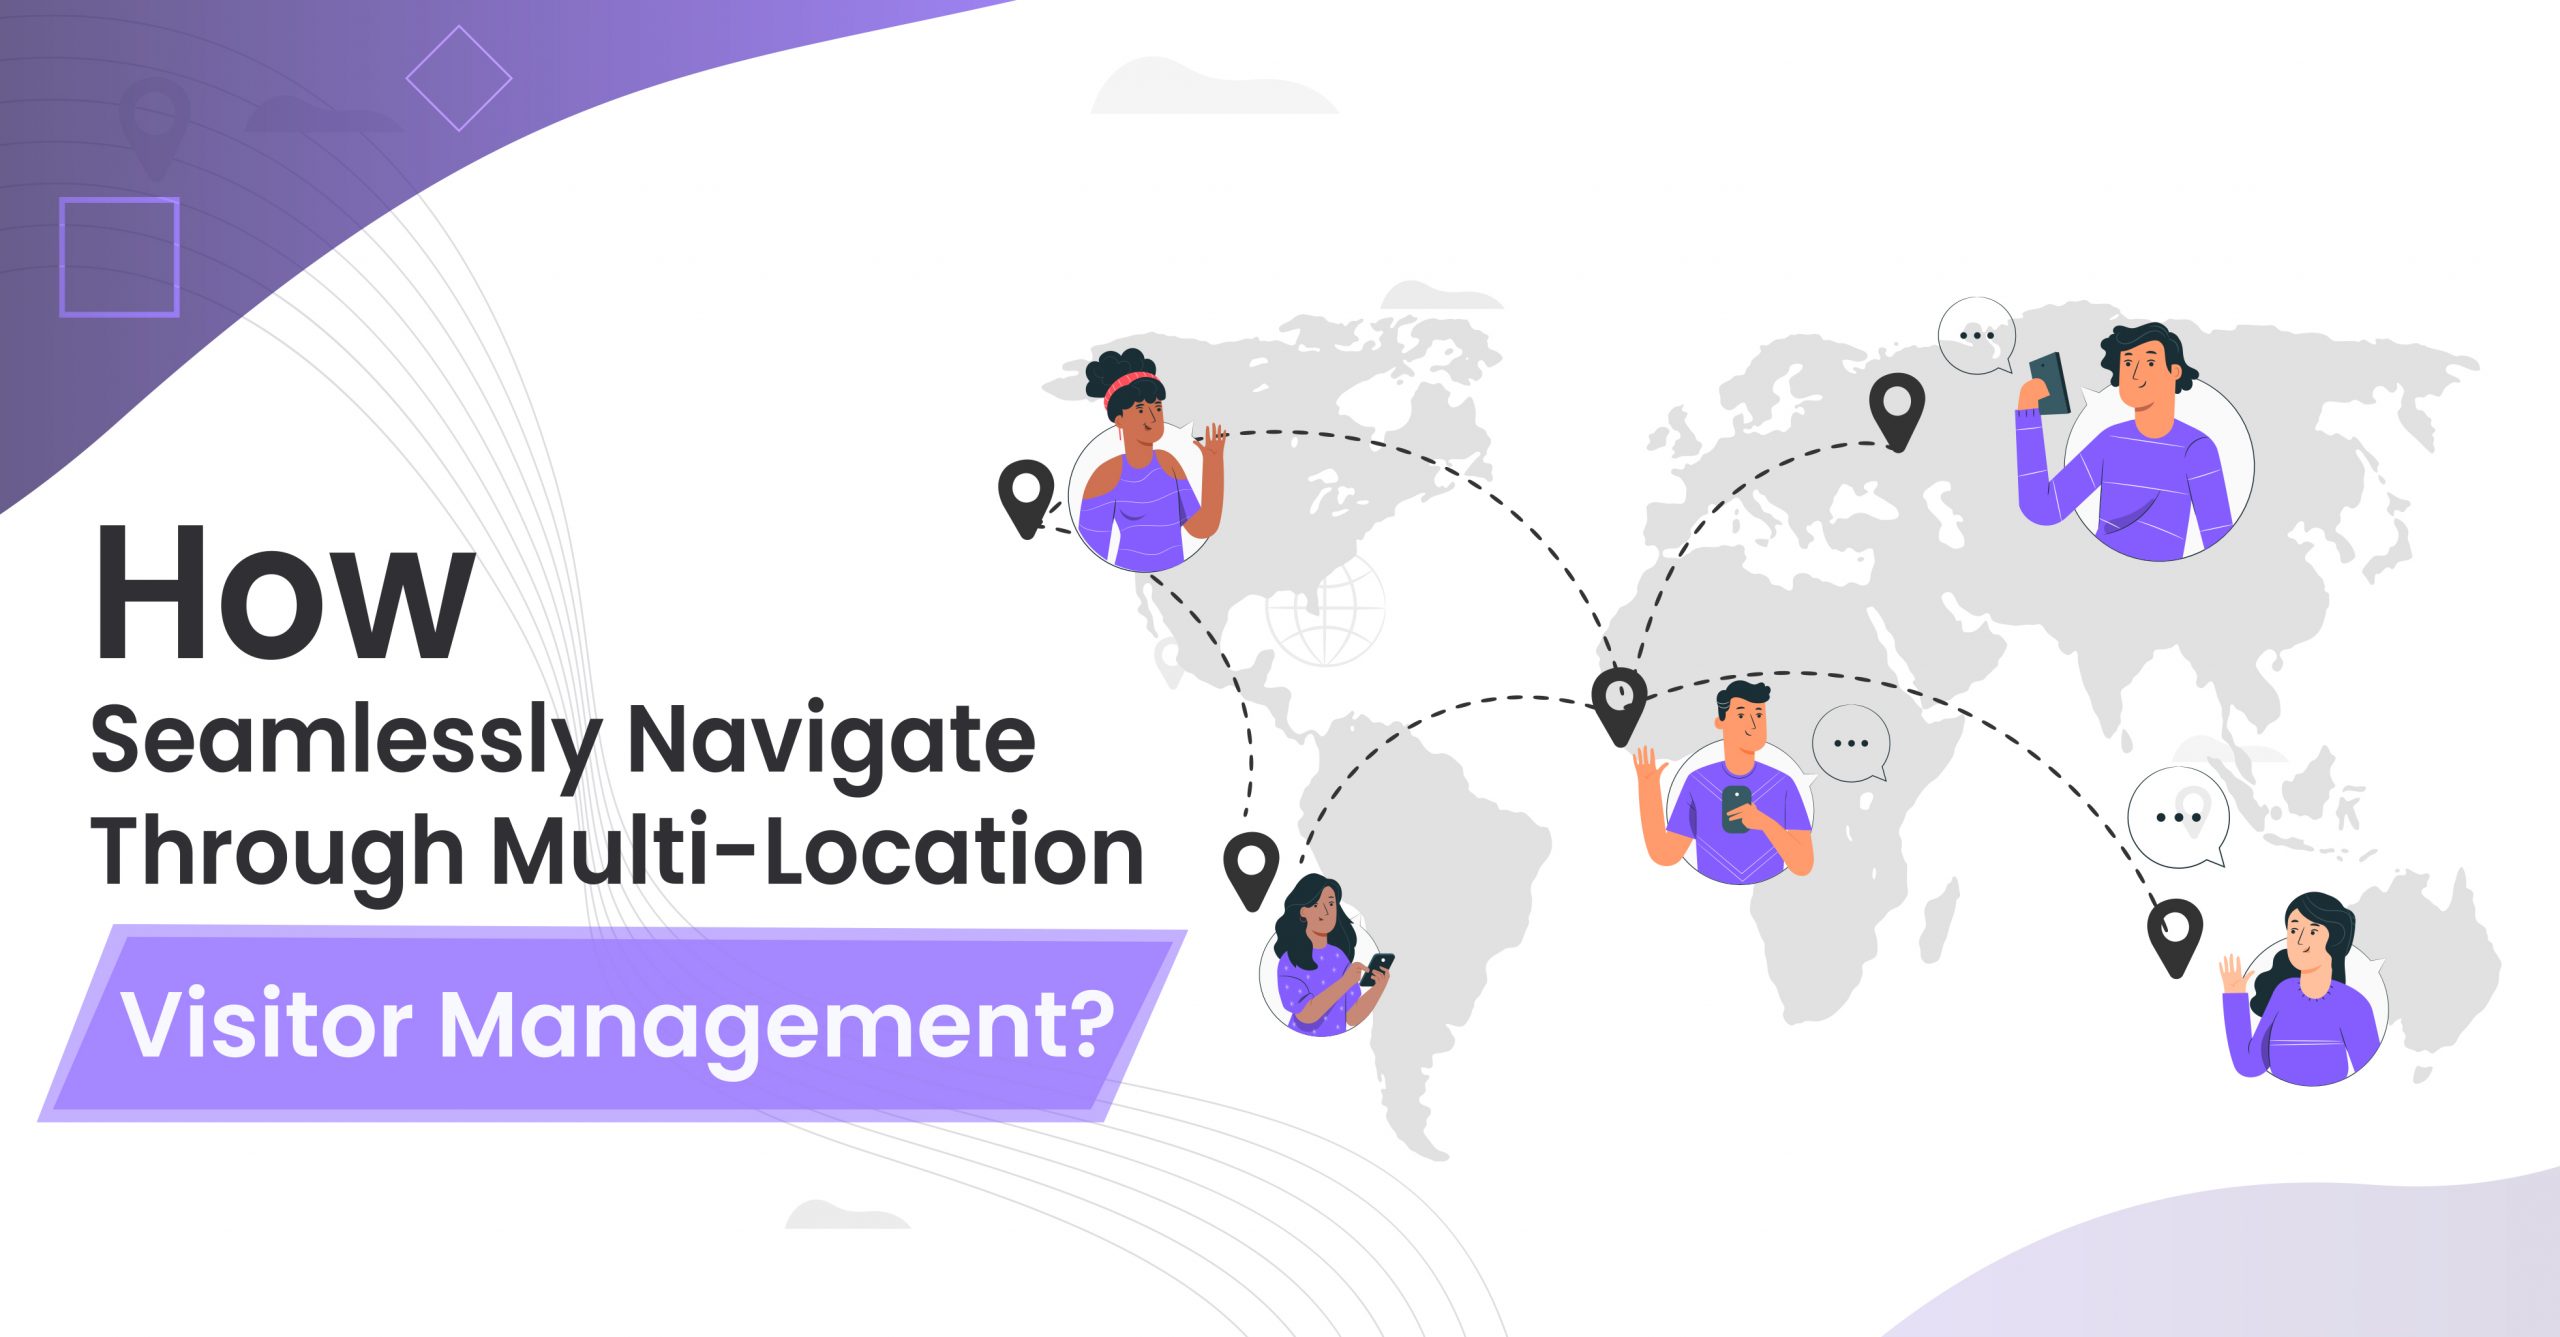 How to Seamlessly Navigate Through Multi Location Visitor Management